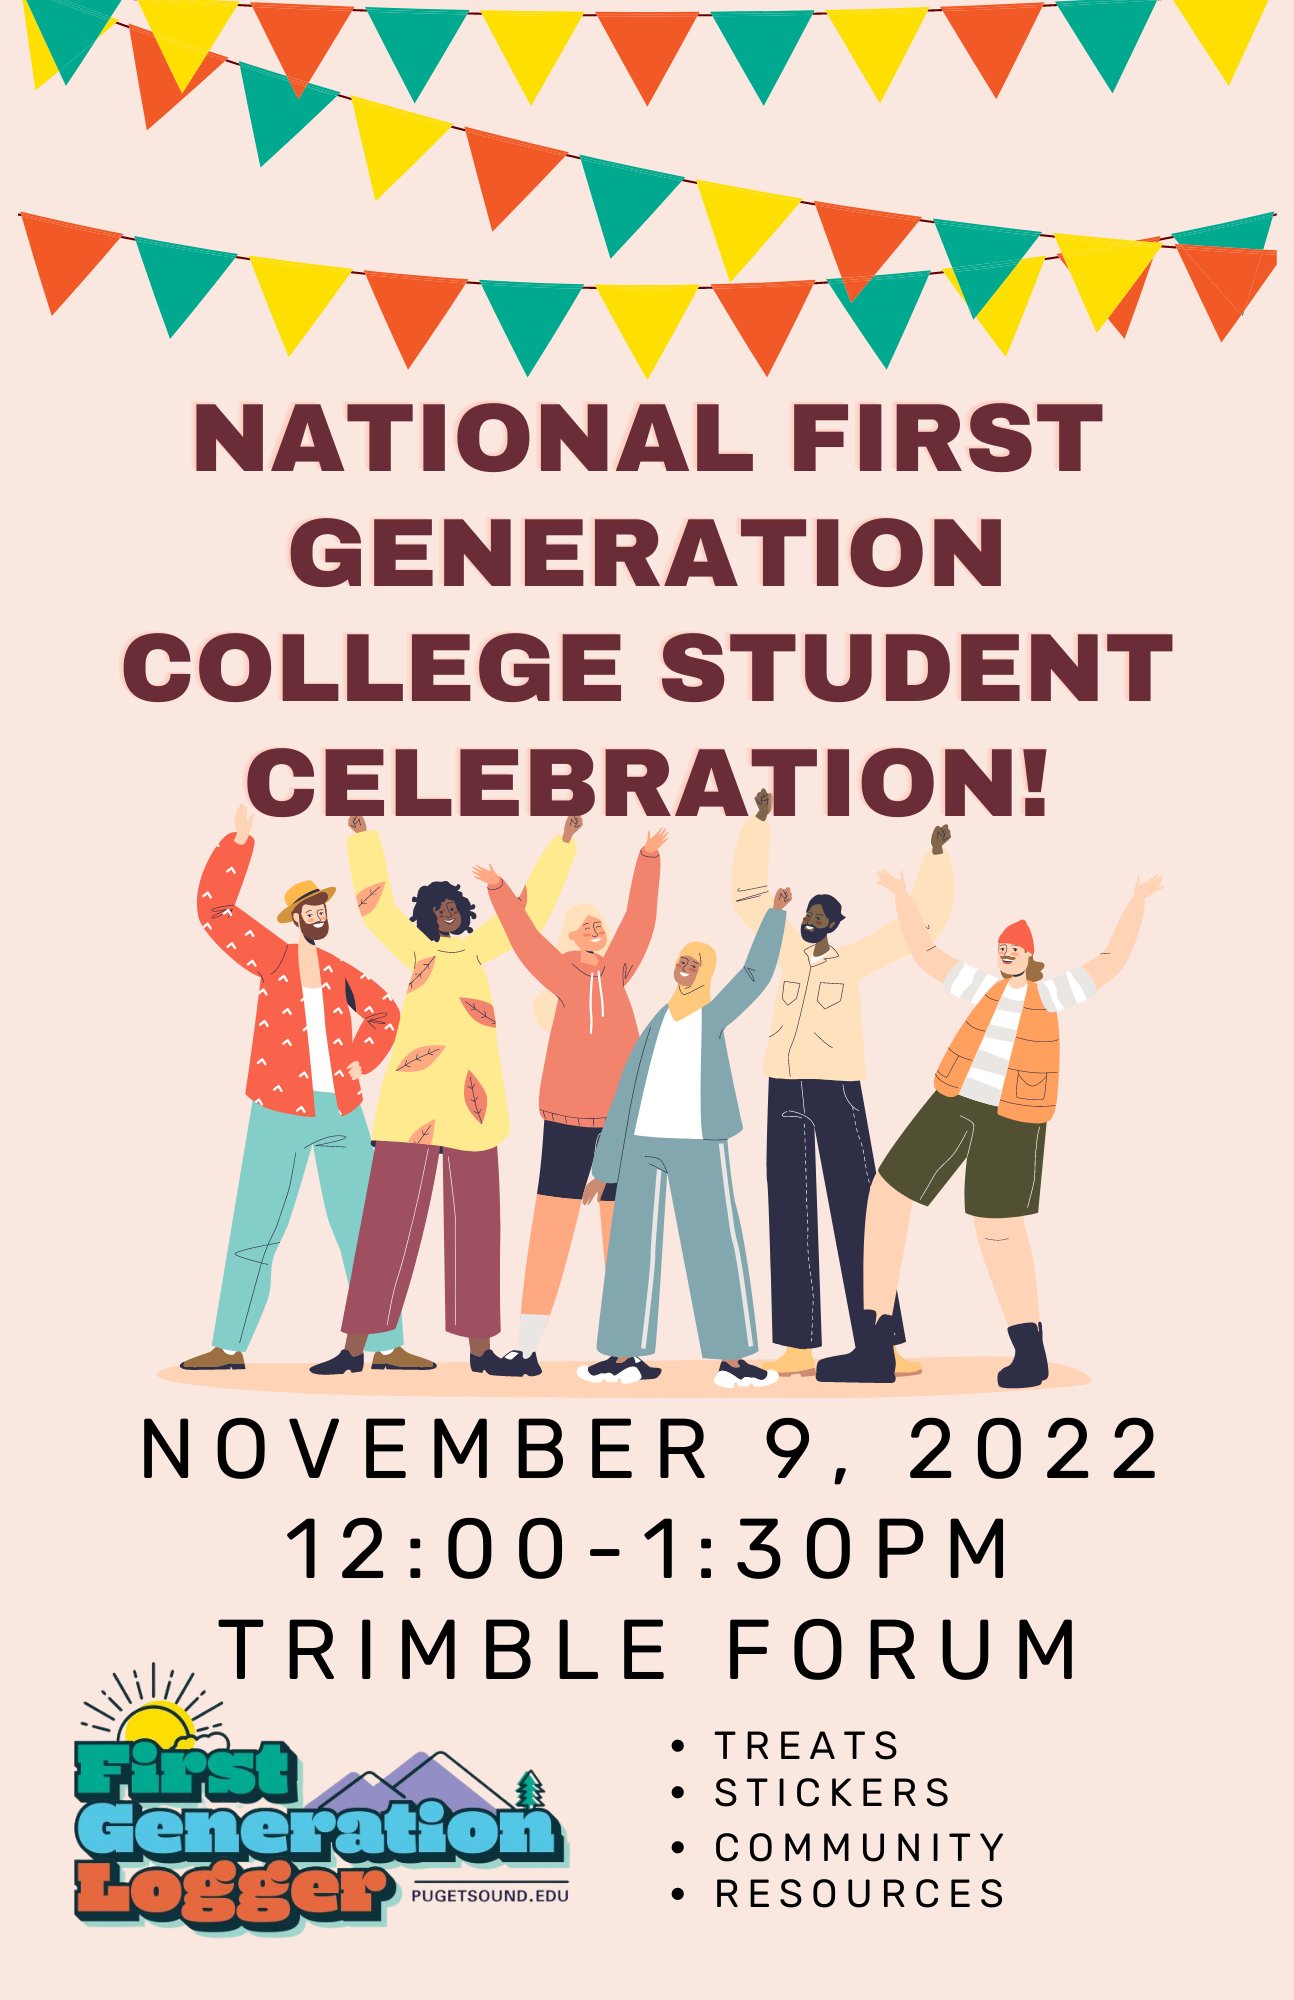 National First Generation College Student Celebration